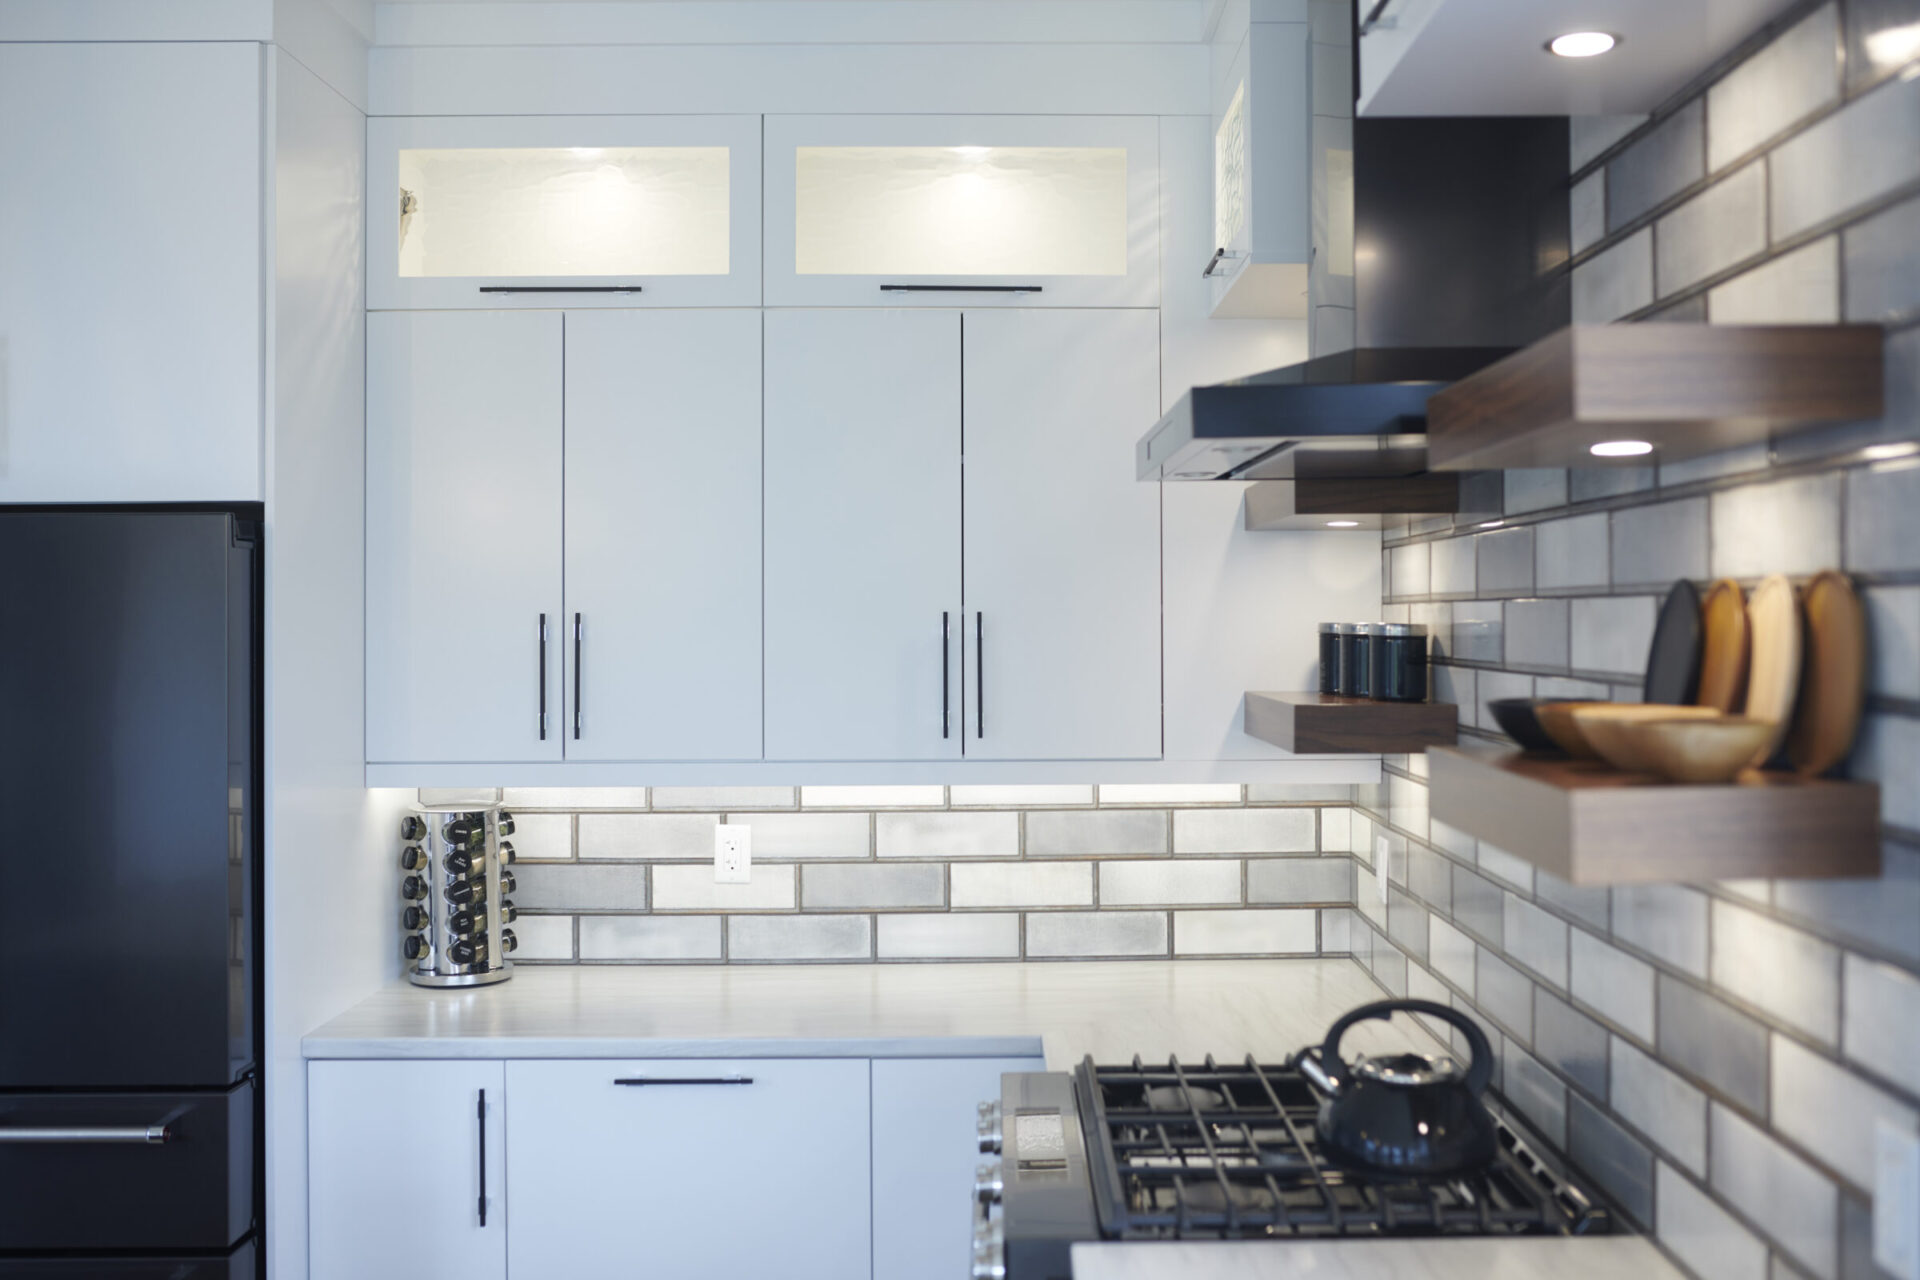 Modern kitchen interior with white cabinets, subway tile backsplash, stainless steel appliances, floating shelves, and dark countertop. Clean, organized, with natural light.